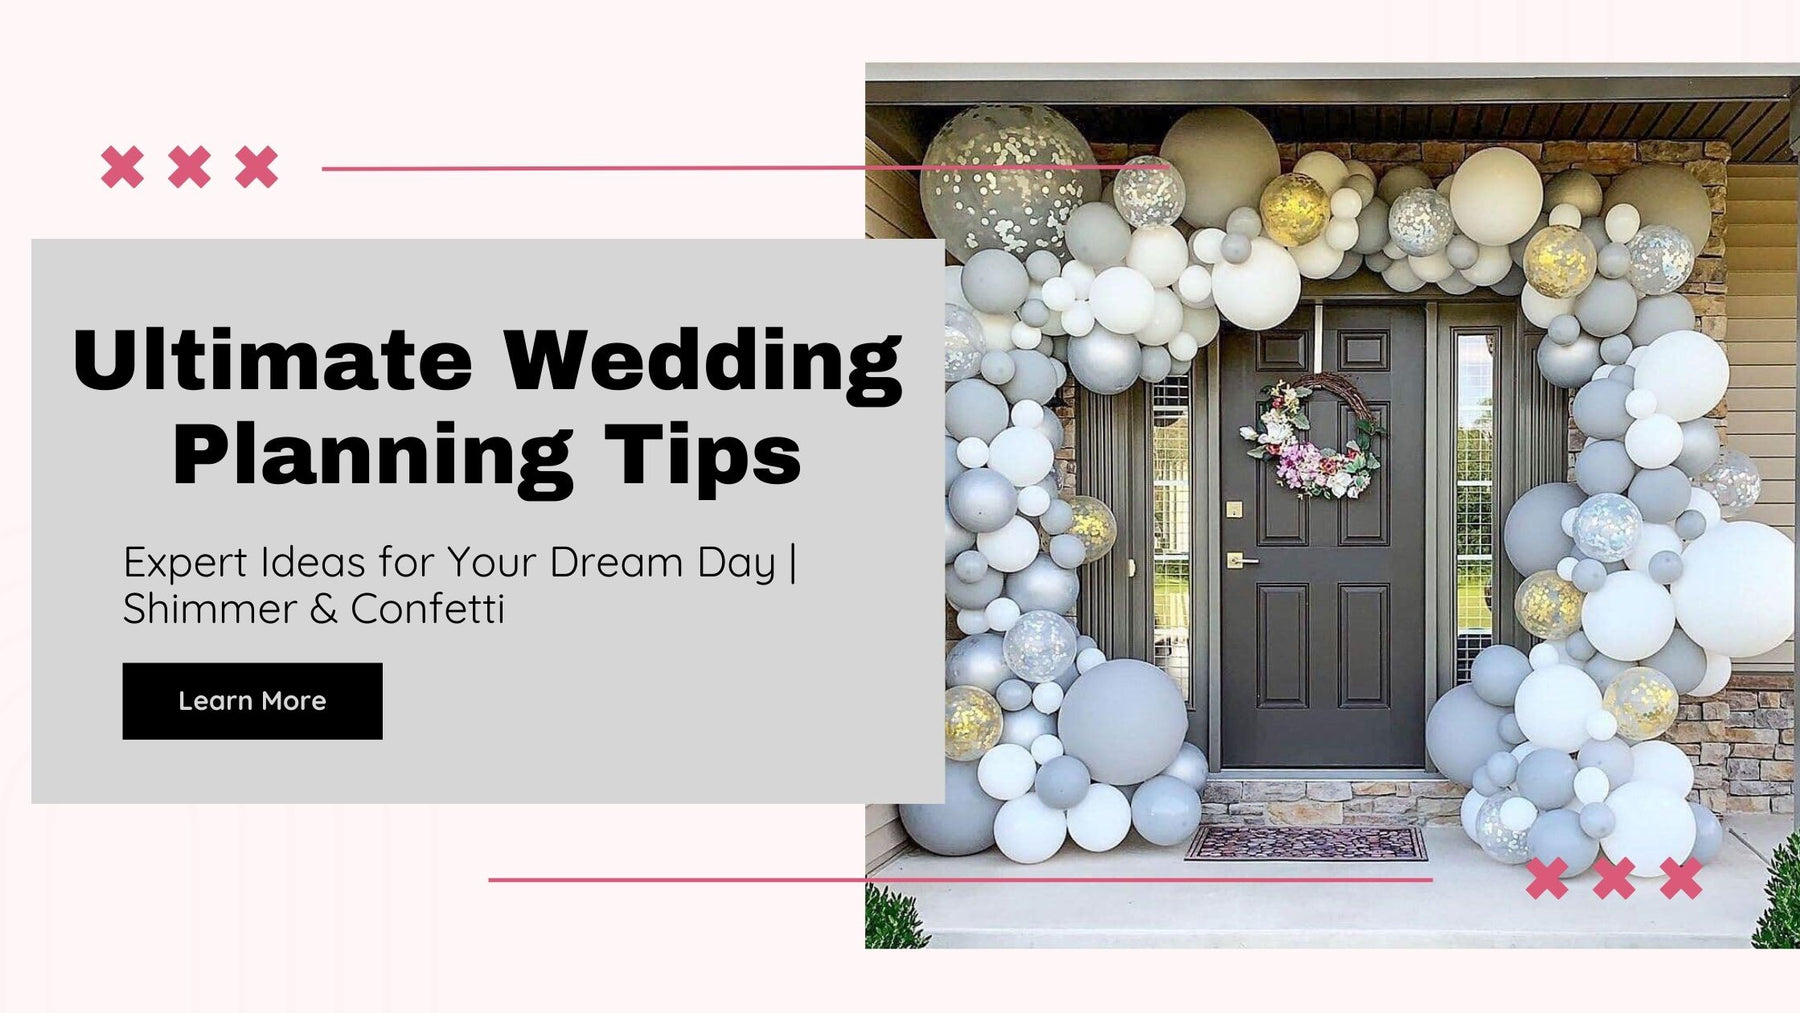 Ultimate Wedding Planning Tips - Shimmer & Confetti